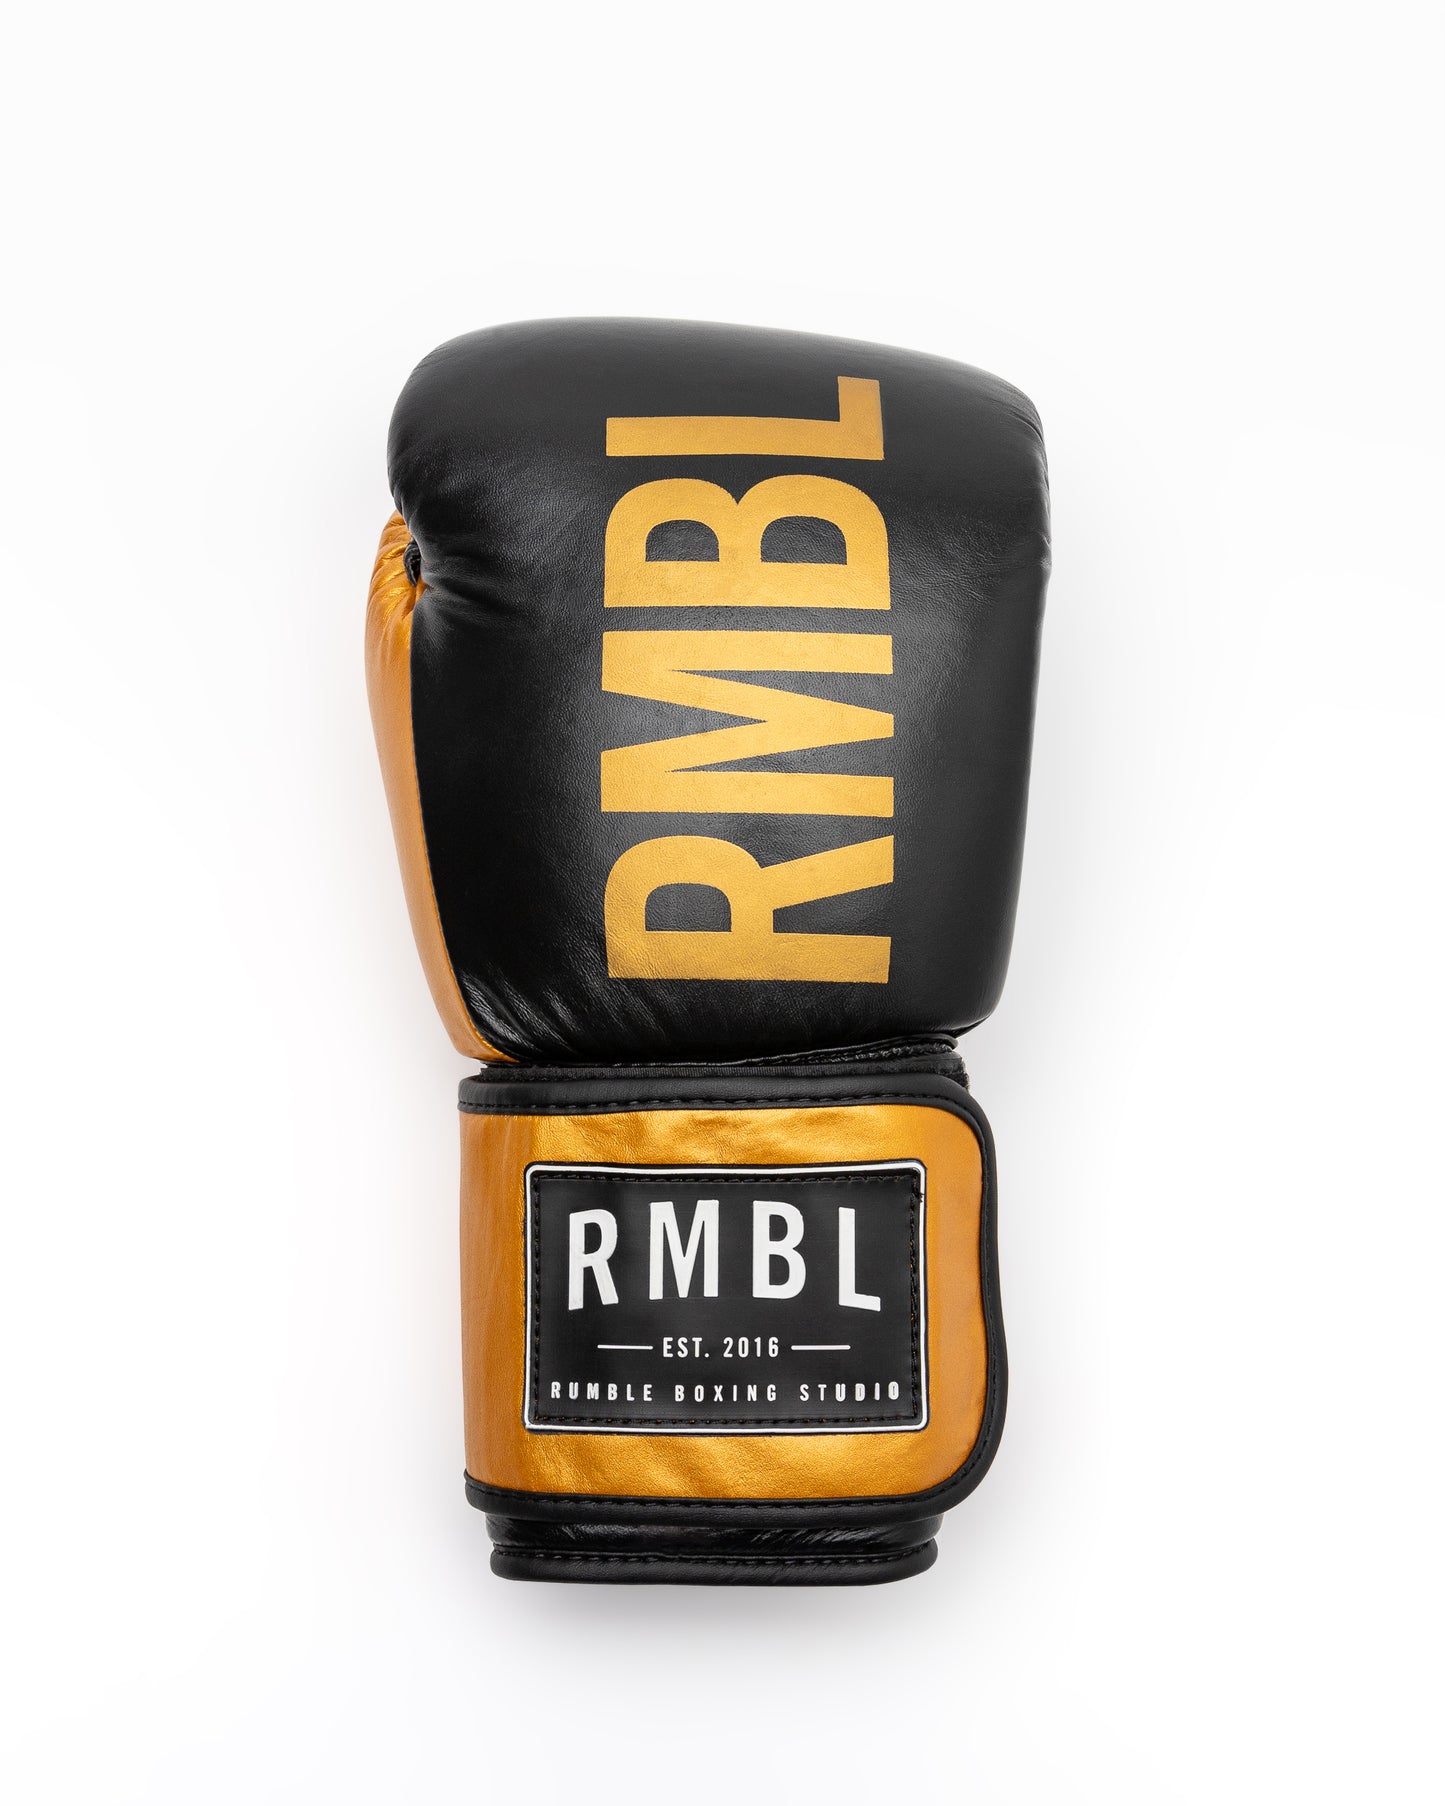 Premium RMBL Leather Gloves Black and Gold